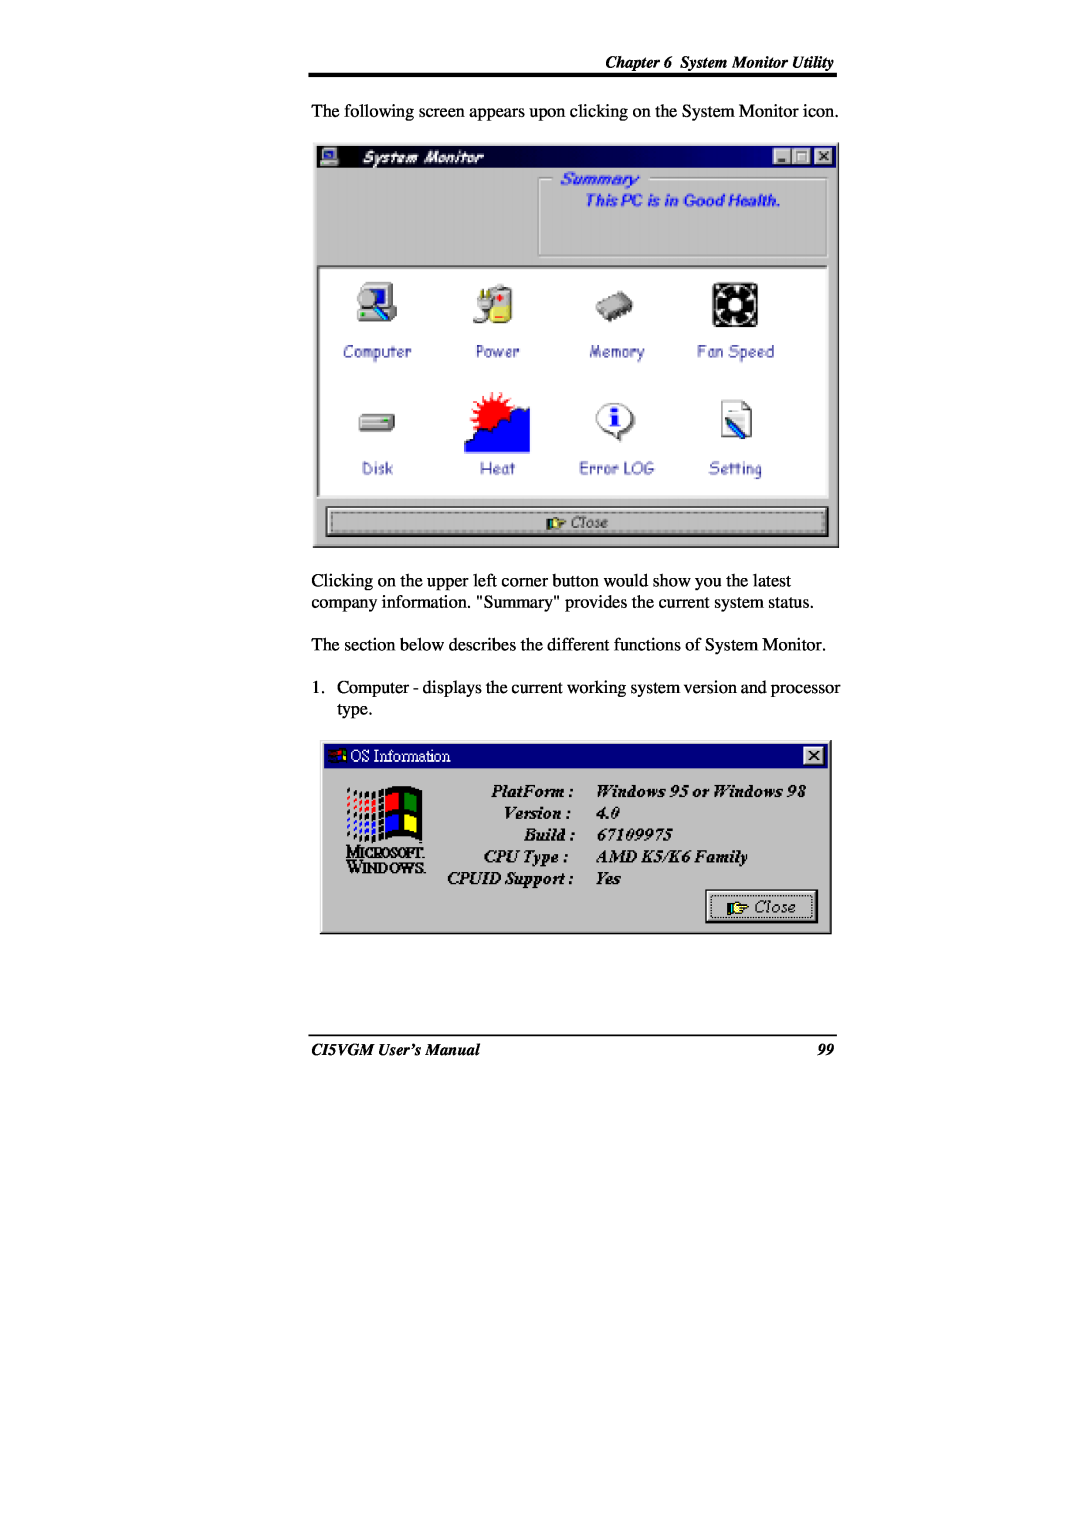 IBM CI5VGM Series user manual The following screen appears upon clicking on the System Monitor icon, System Monitor Utility 